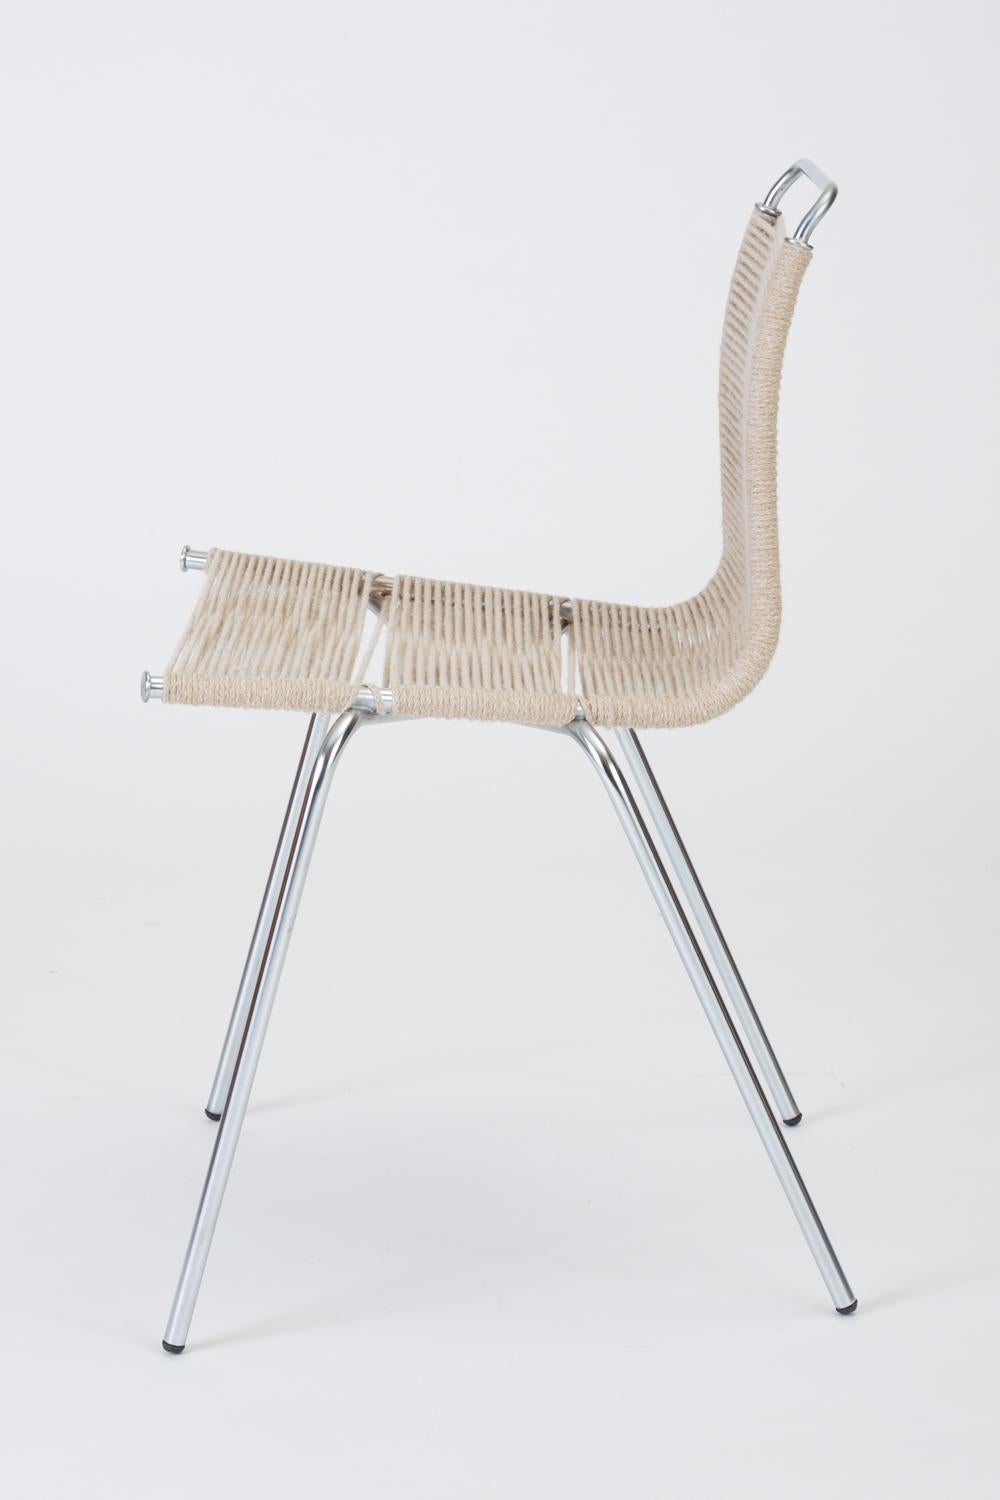 Mid-20th Century Single PK-1 Dining or Accent Chair by Poul Kjærholm for E Kold Christensen